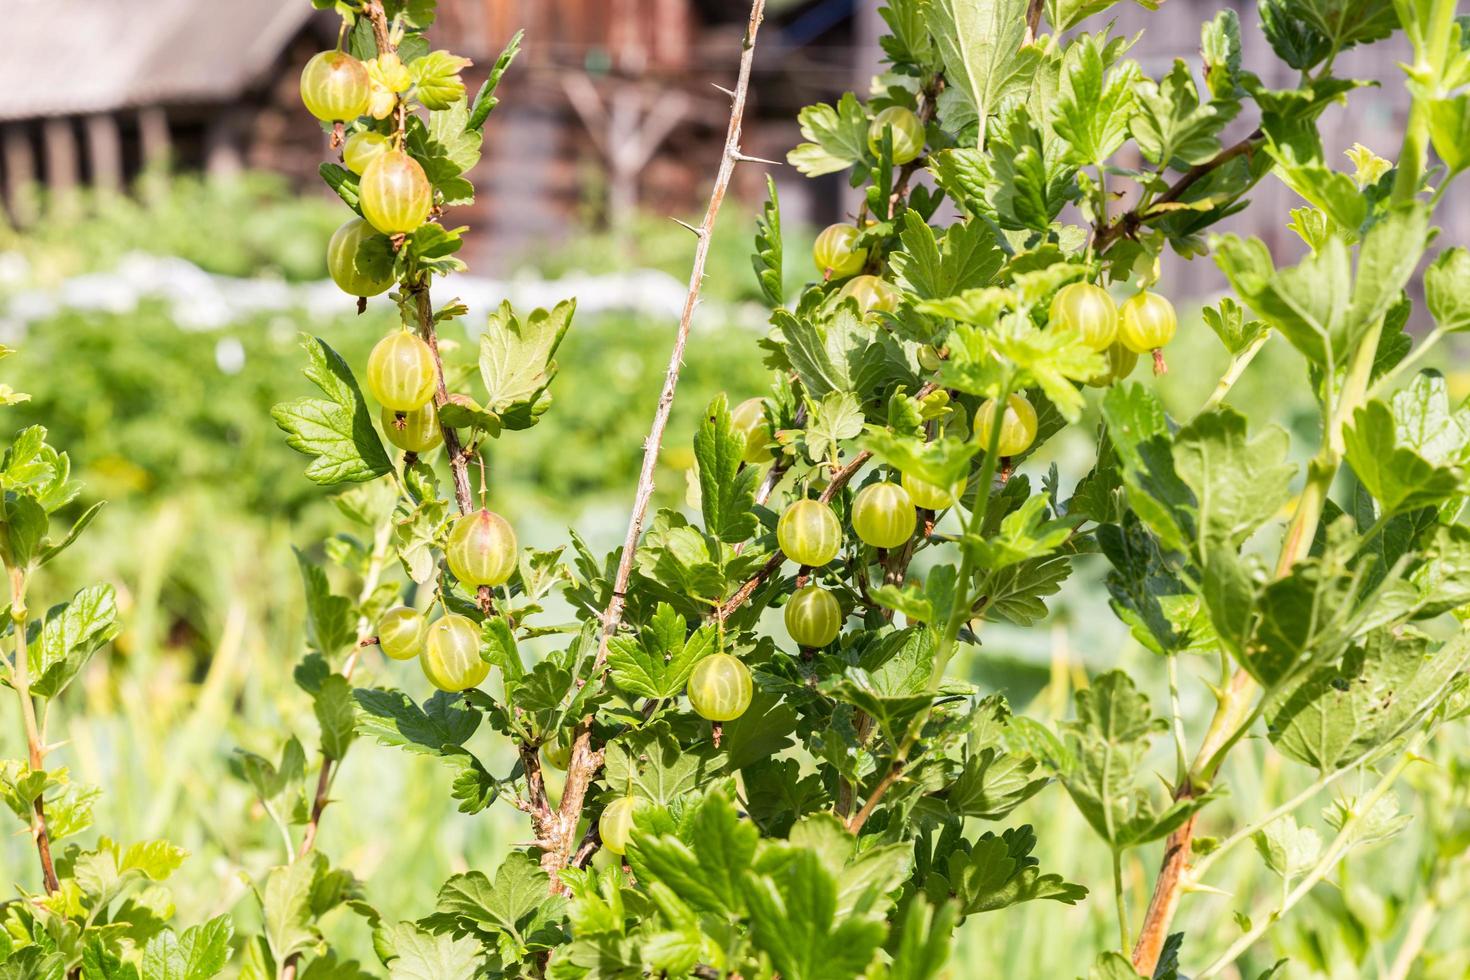 ripening gooseberries on the branch in the garden photo